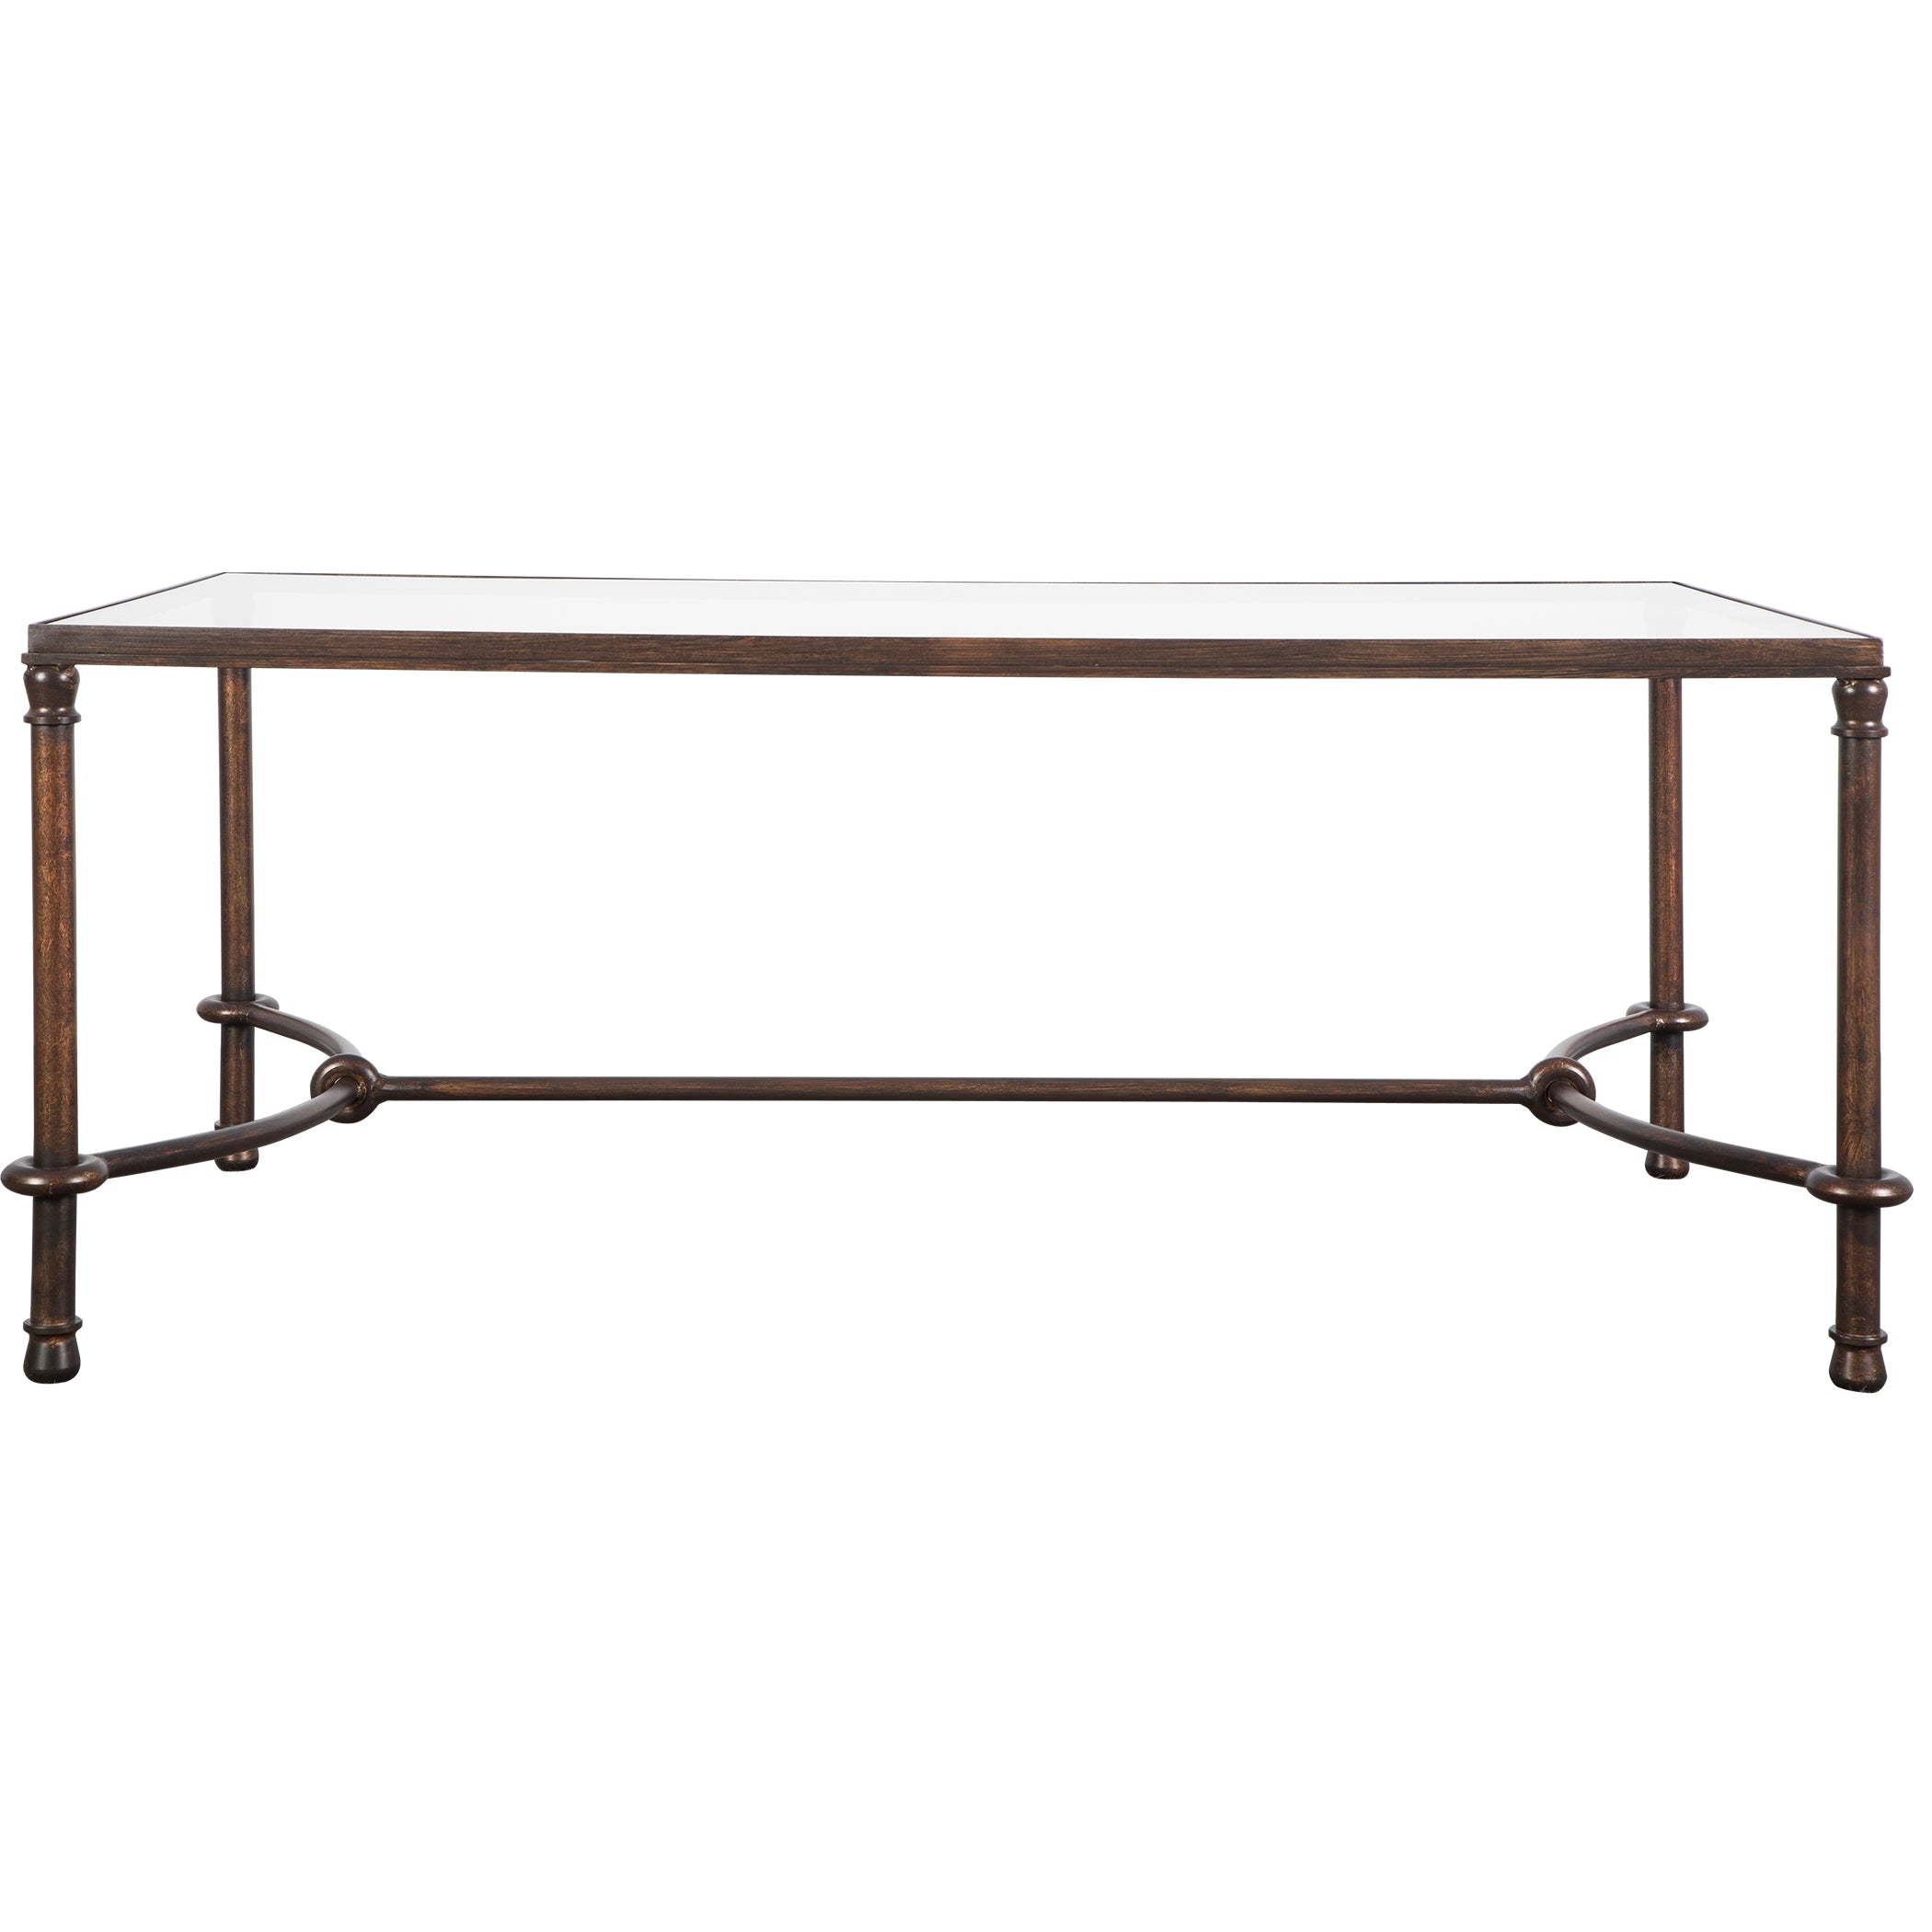 Uttermost Warring Cocktail & Coffee Tables Cocktail & Coffee Tables Uttermost   